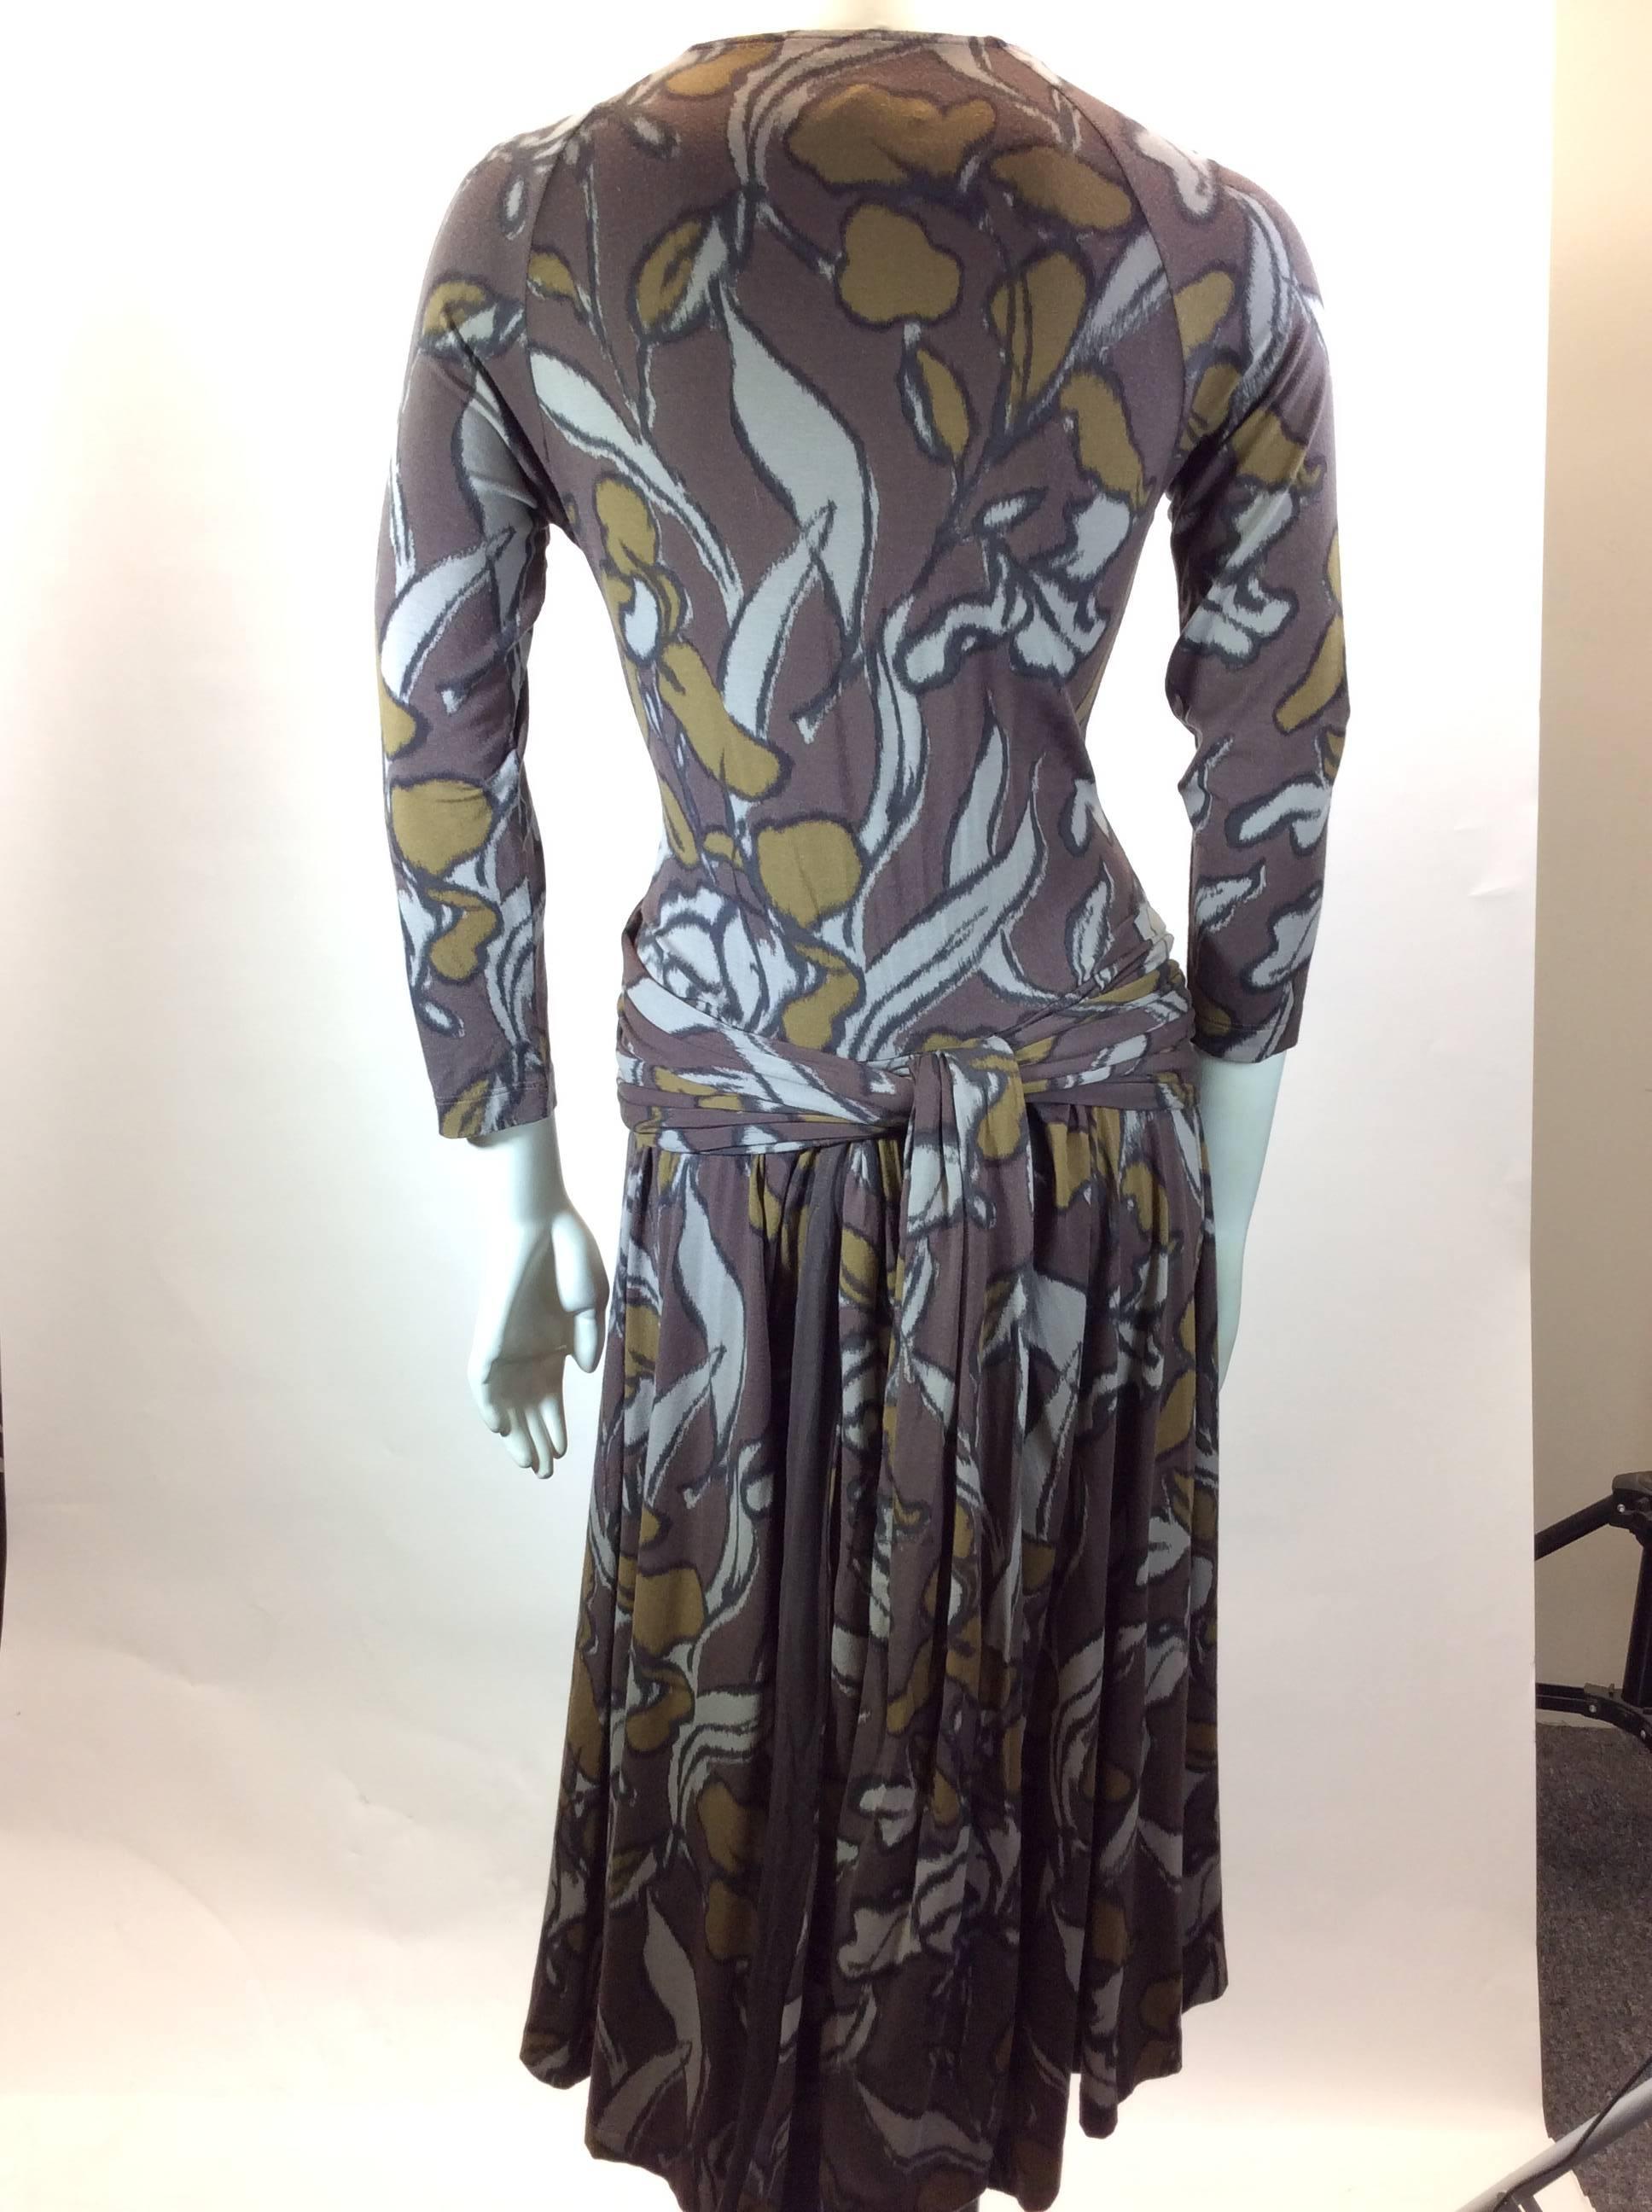 Etro Brown Print Wrap Dress In Excellent Condition For Sale In Narberth, PA